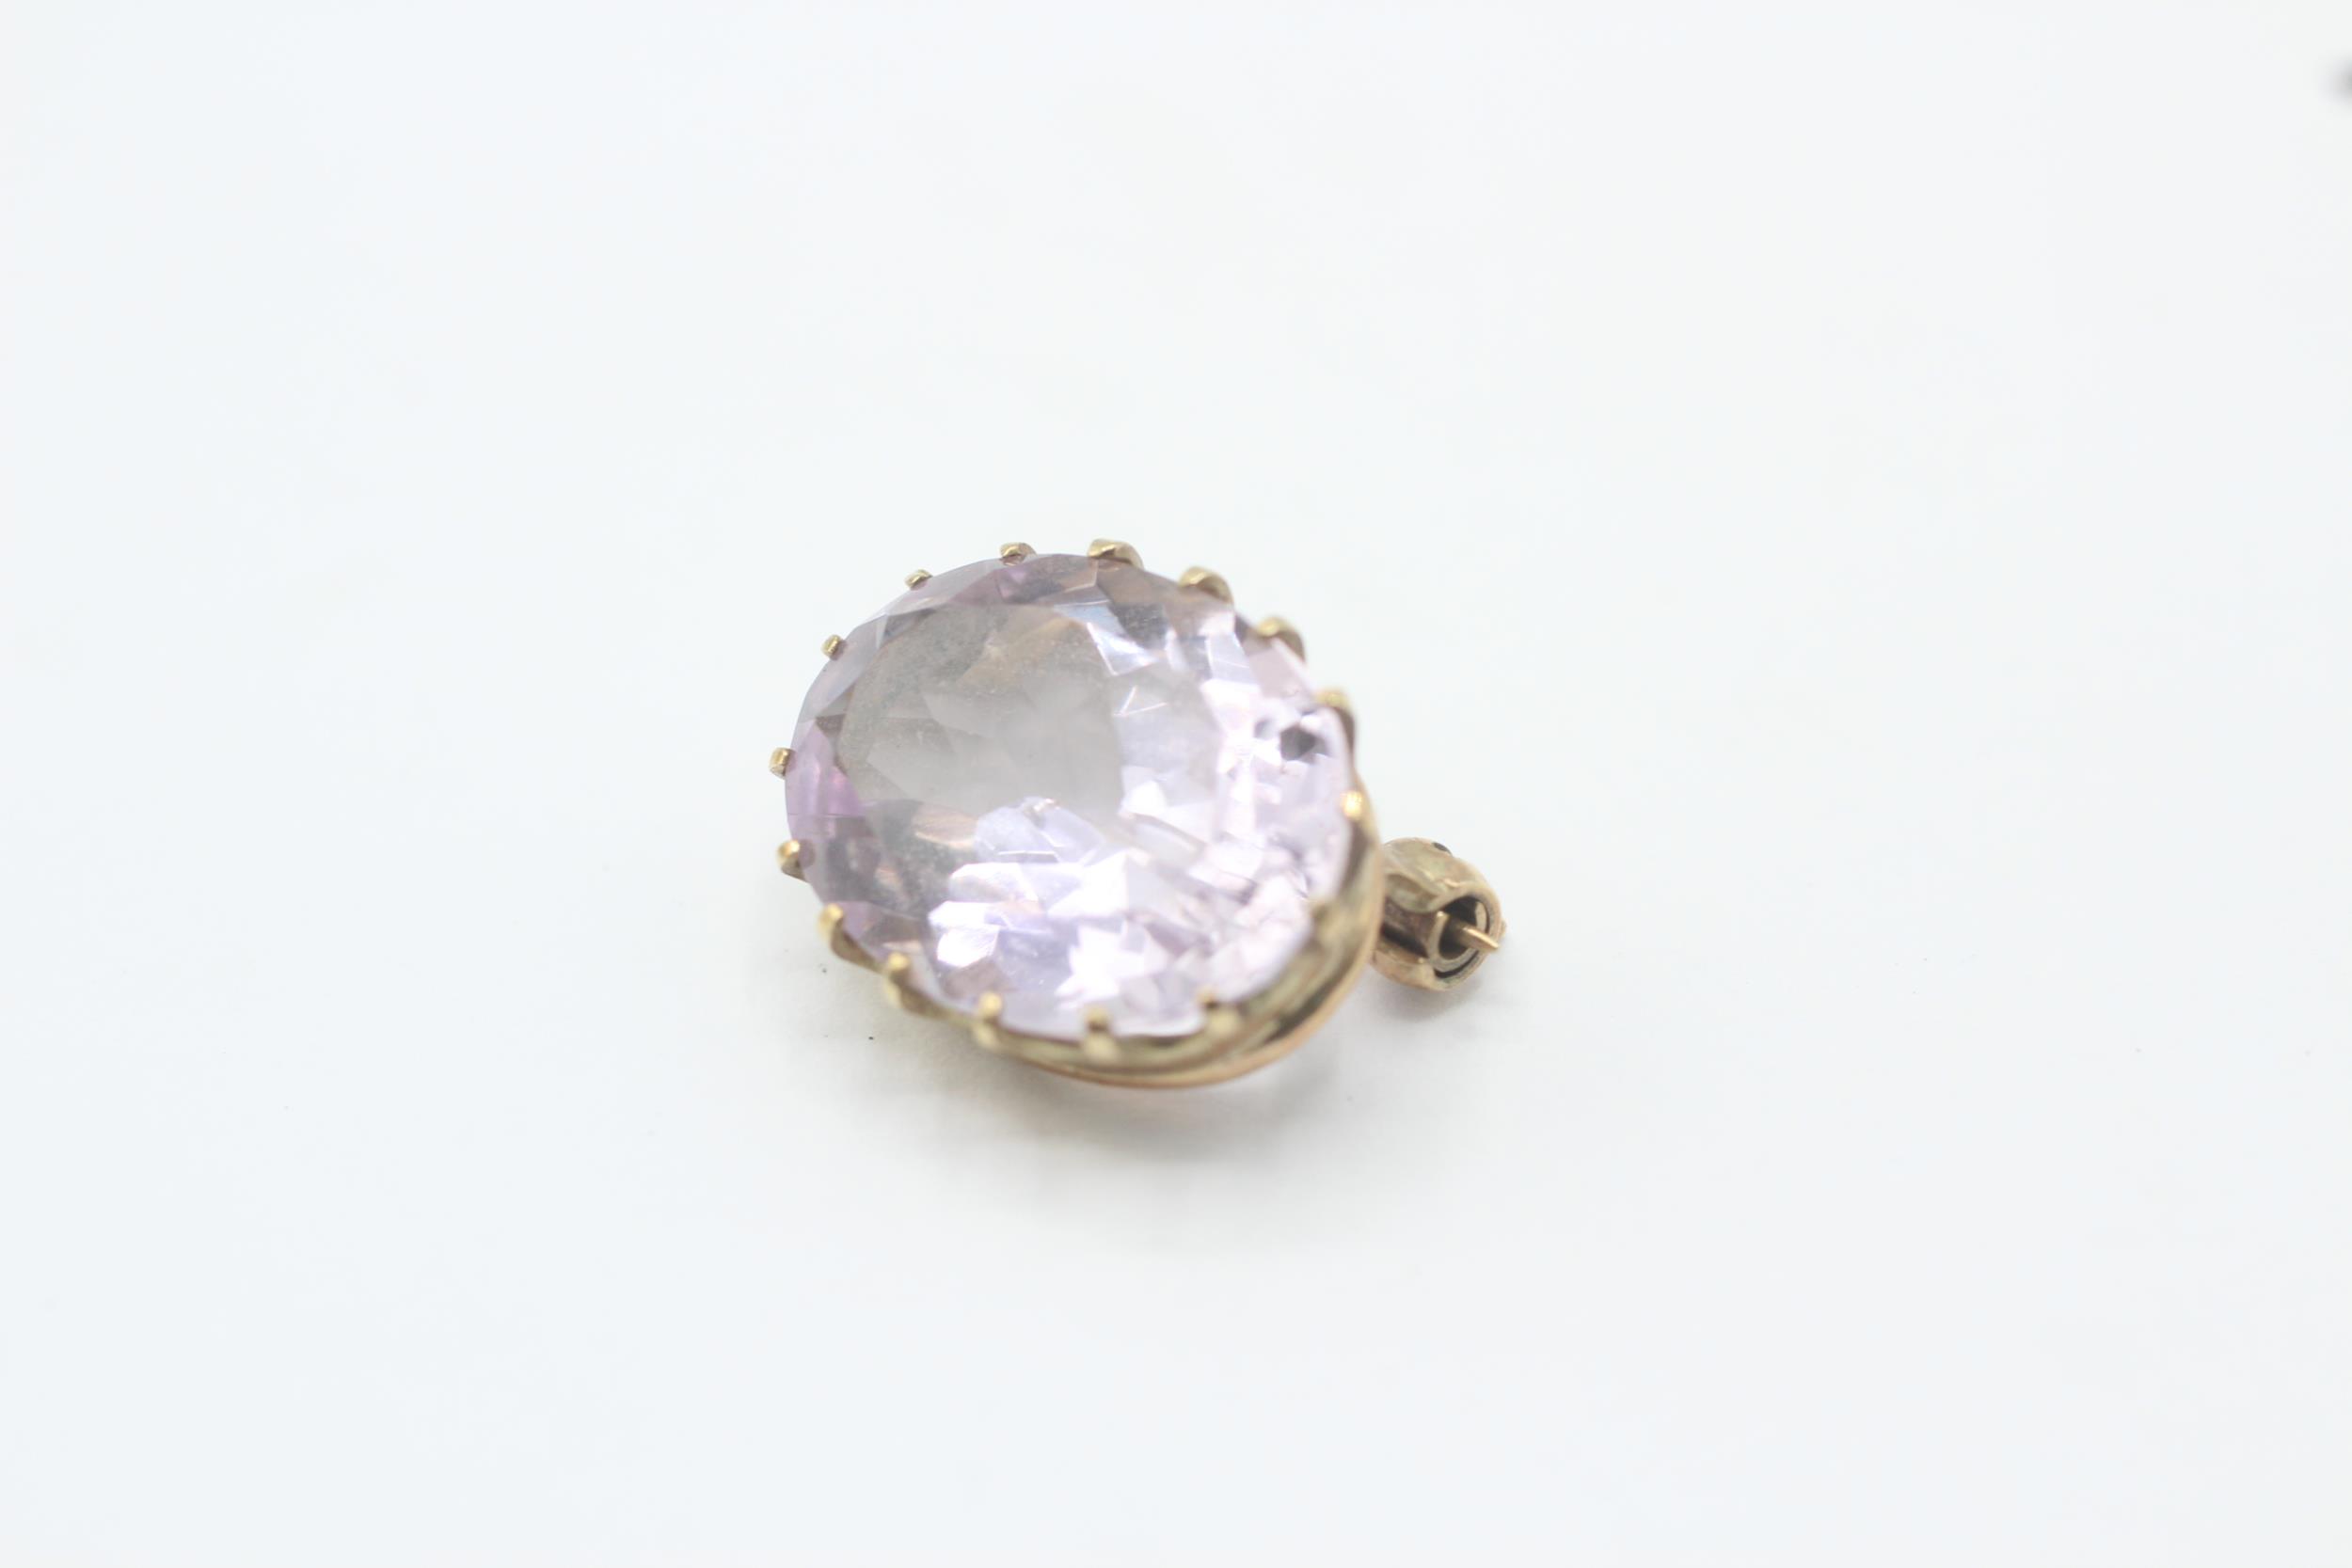 9ct gold antique oval amethyst single stone brooch - Image 2 of 5